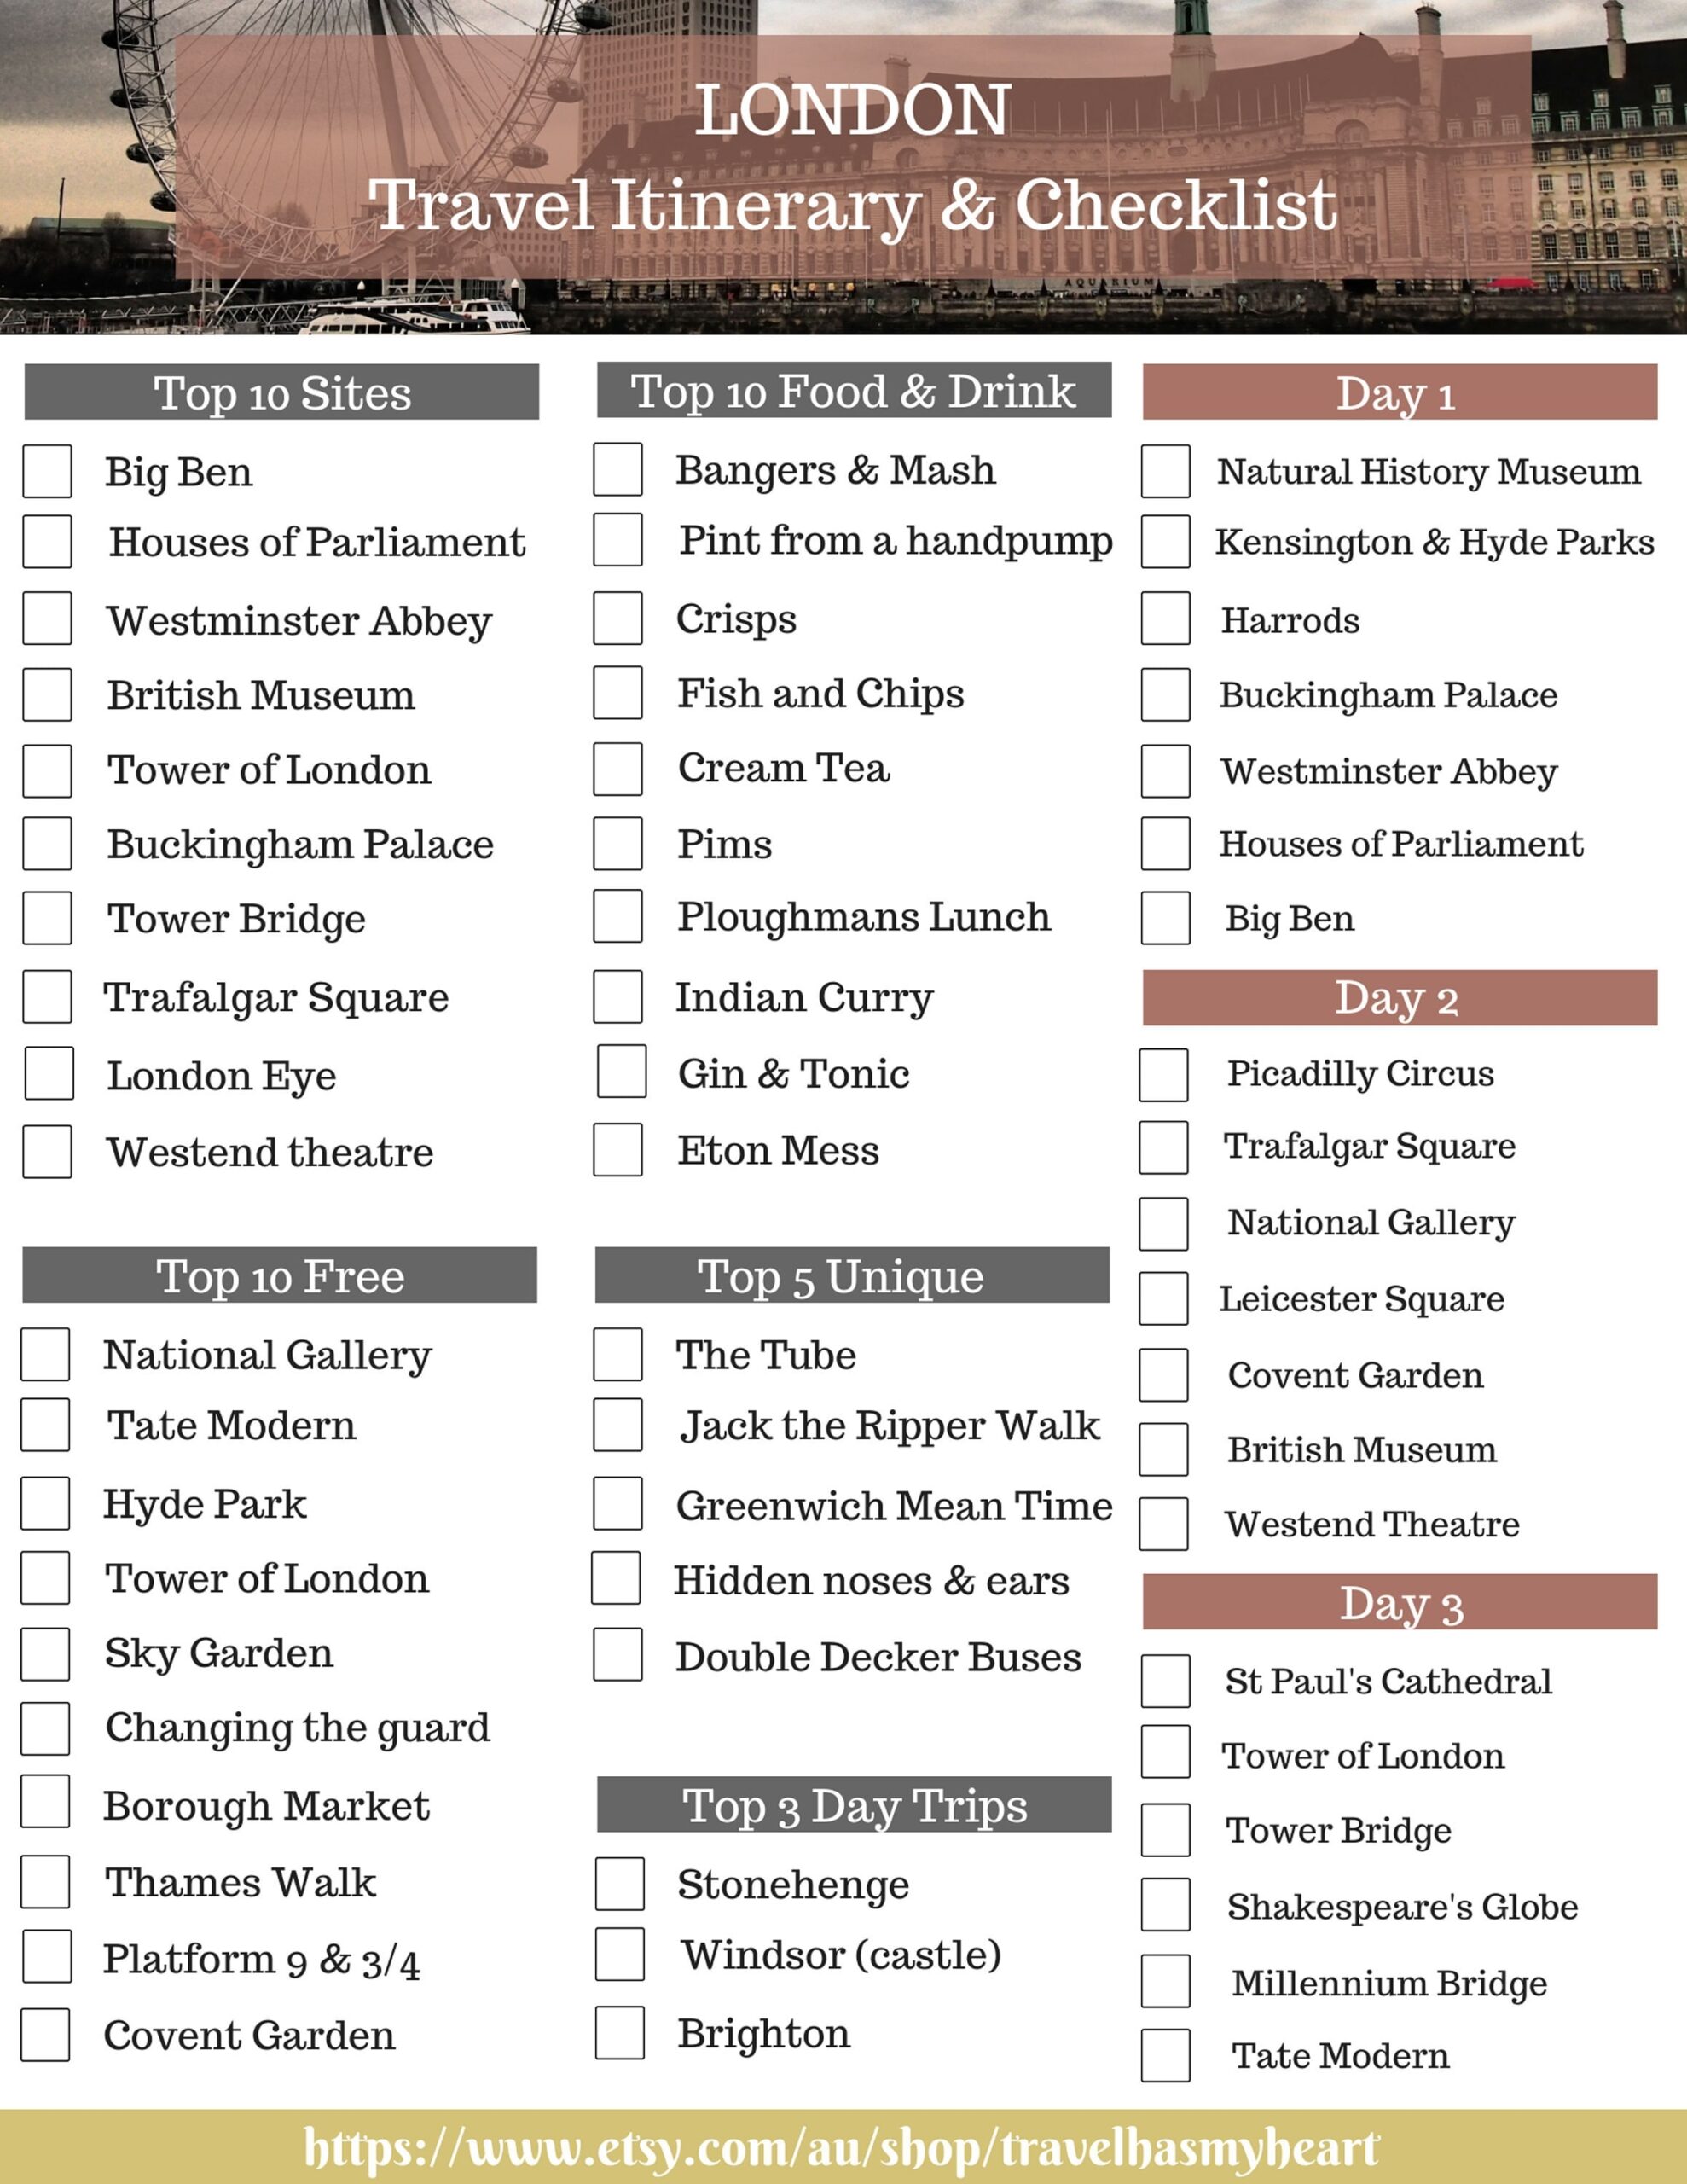 LONDON Travel Checklist Travel Itinerary Printable Travel Planner Vacation Planning PDF Top 10 Sites 3 Day Top 10 Foods Etsy